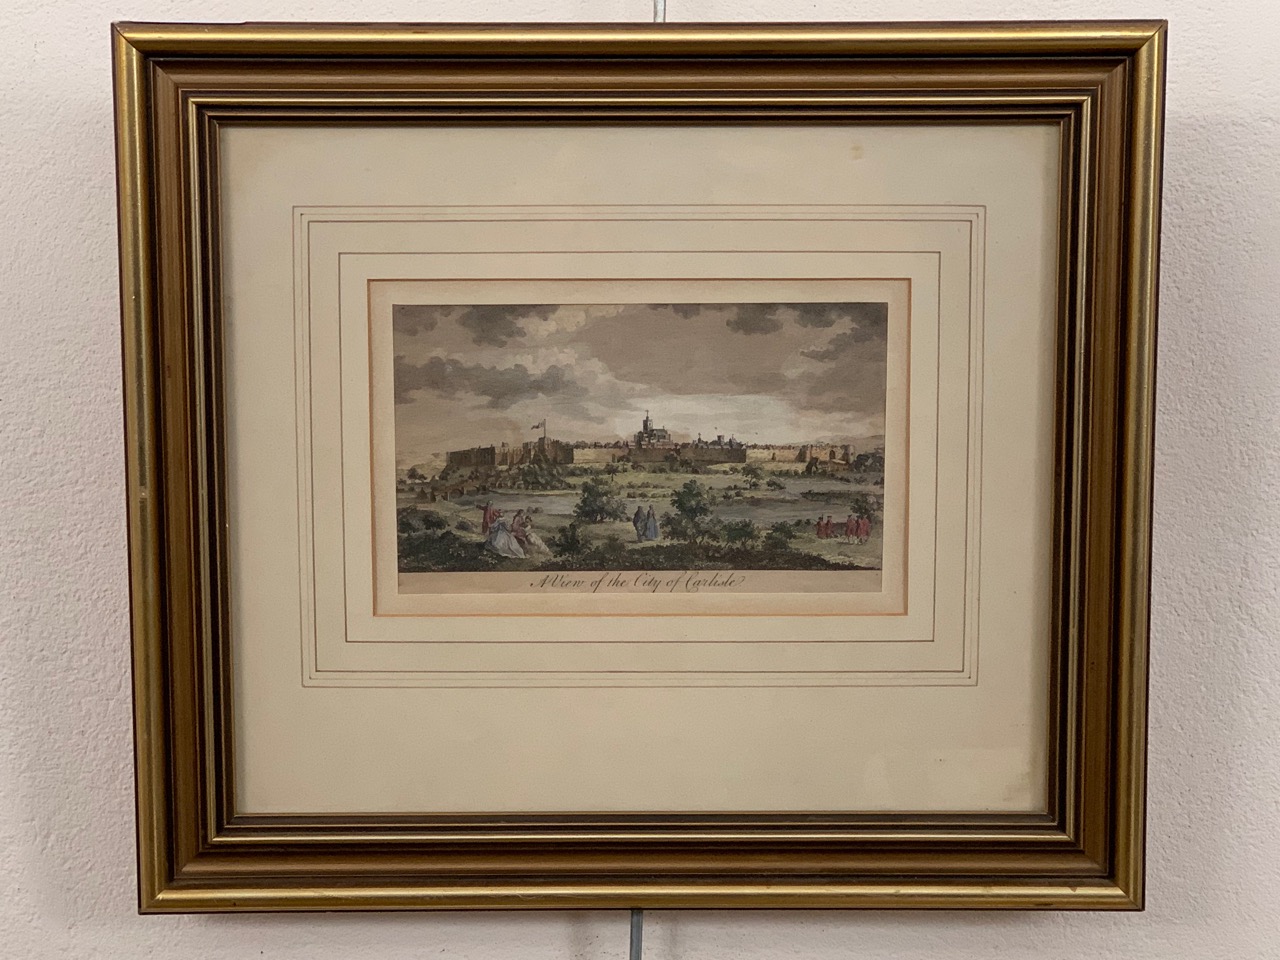 An antique engraving "A View of the City of Carlisle", originally published in The Modern - Image 2 of 2